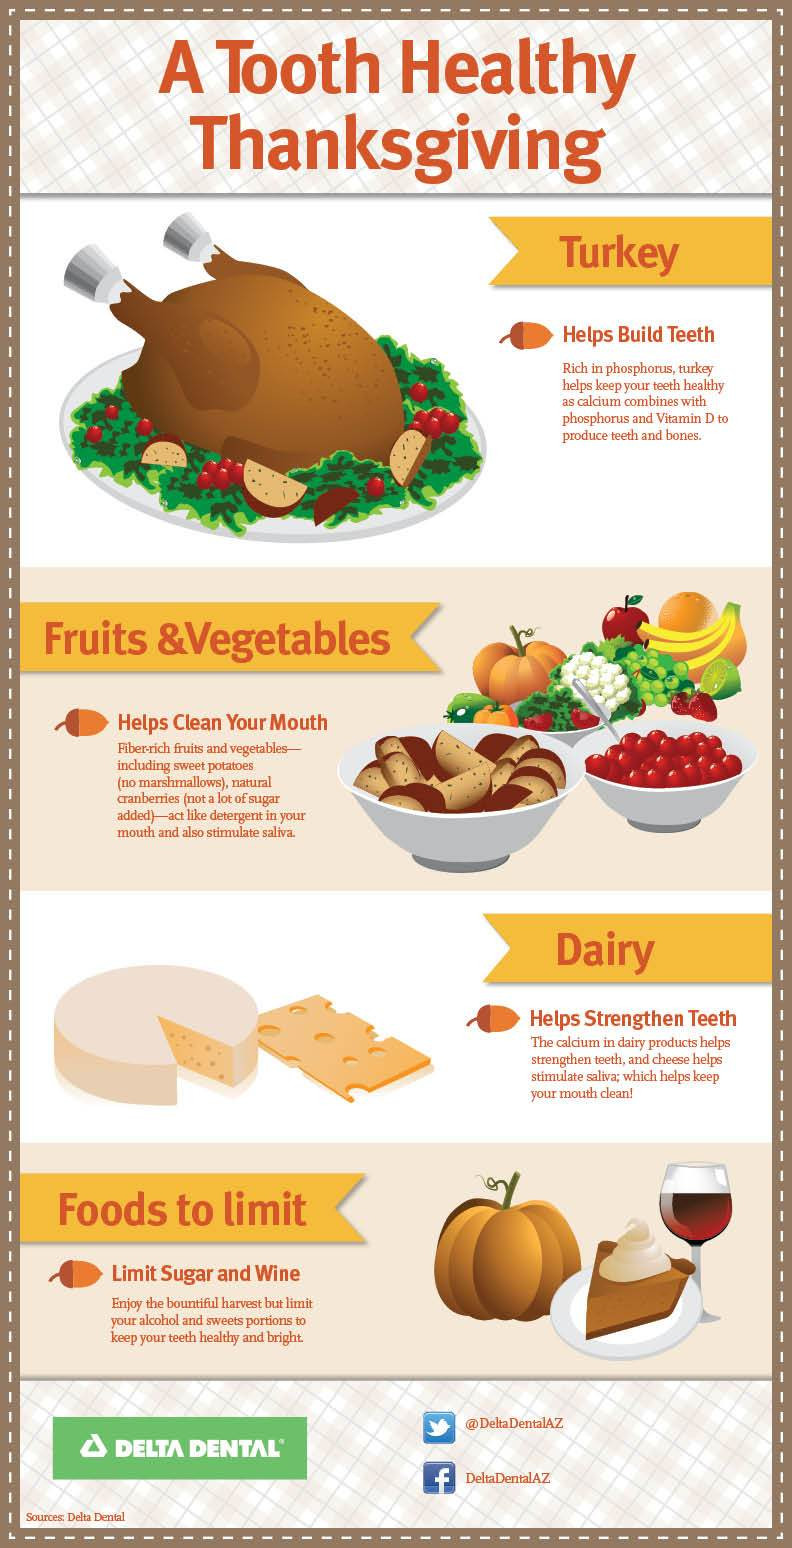 Healthy Thanksgiving Tips
 A Tooth Healthy Thanksgiving